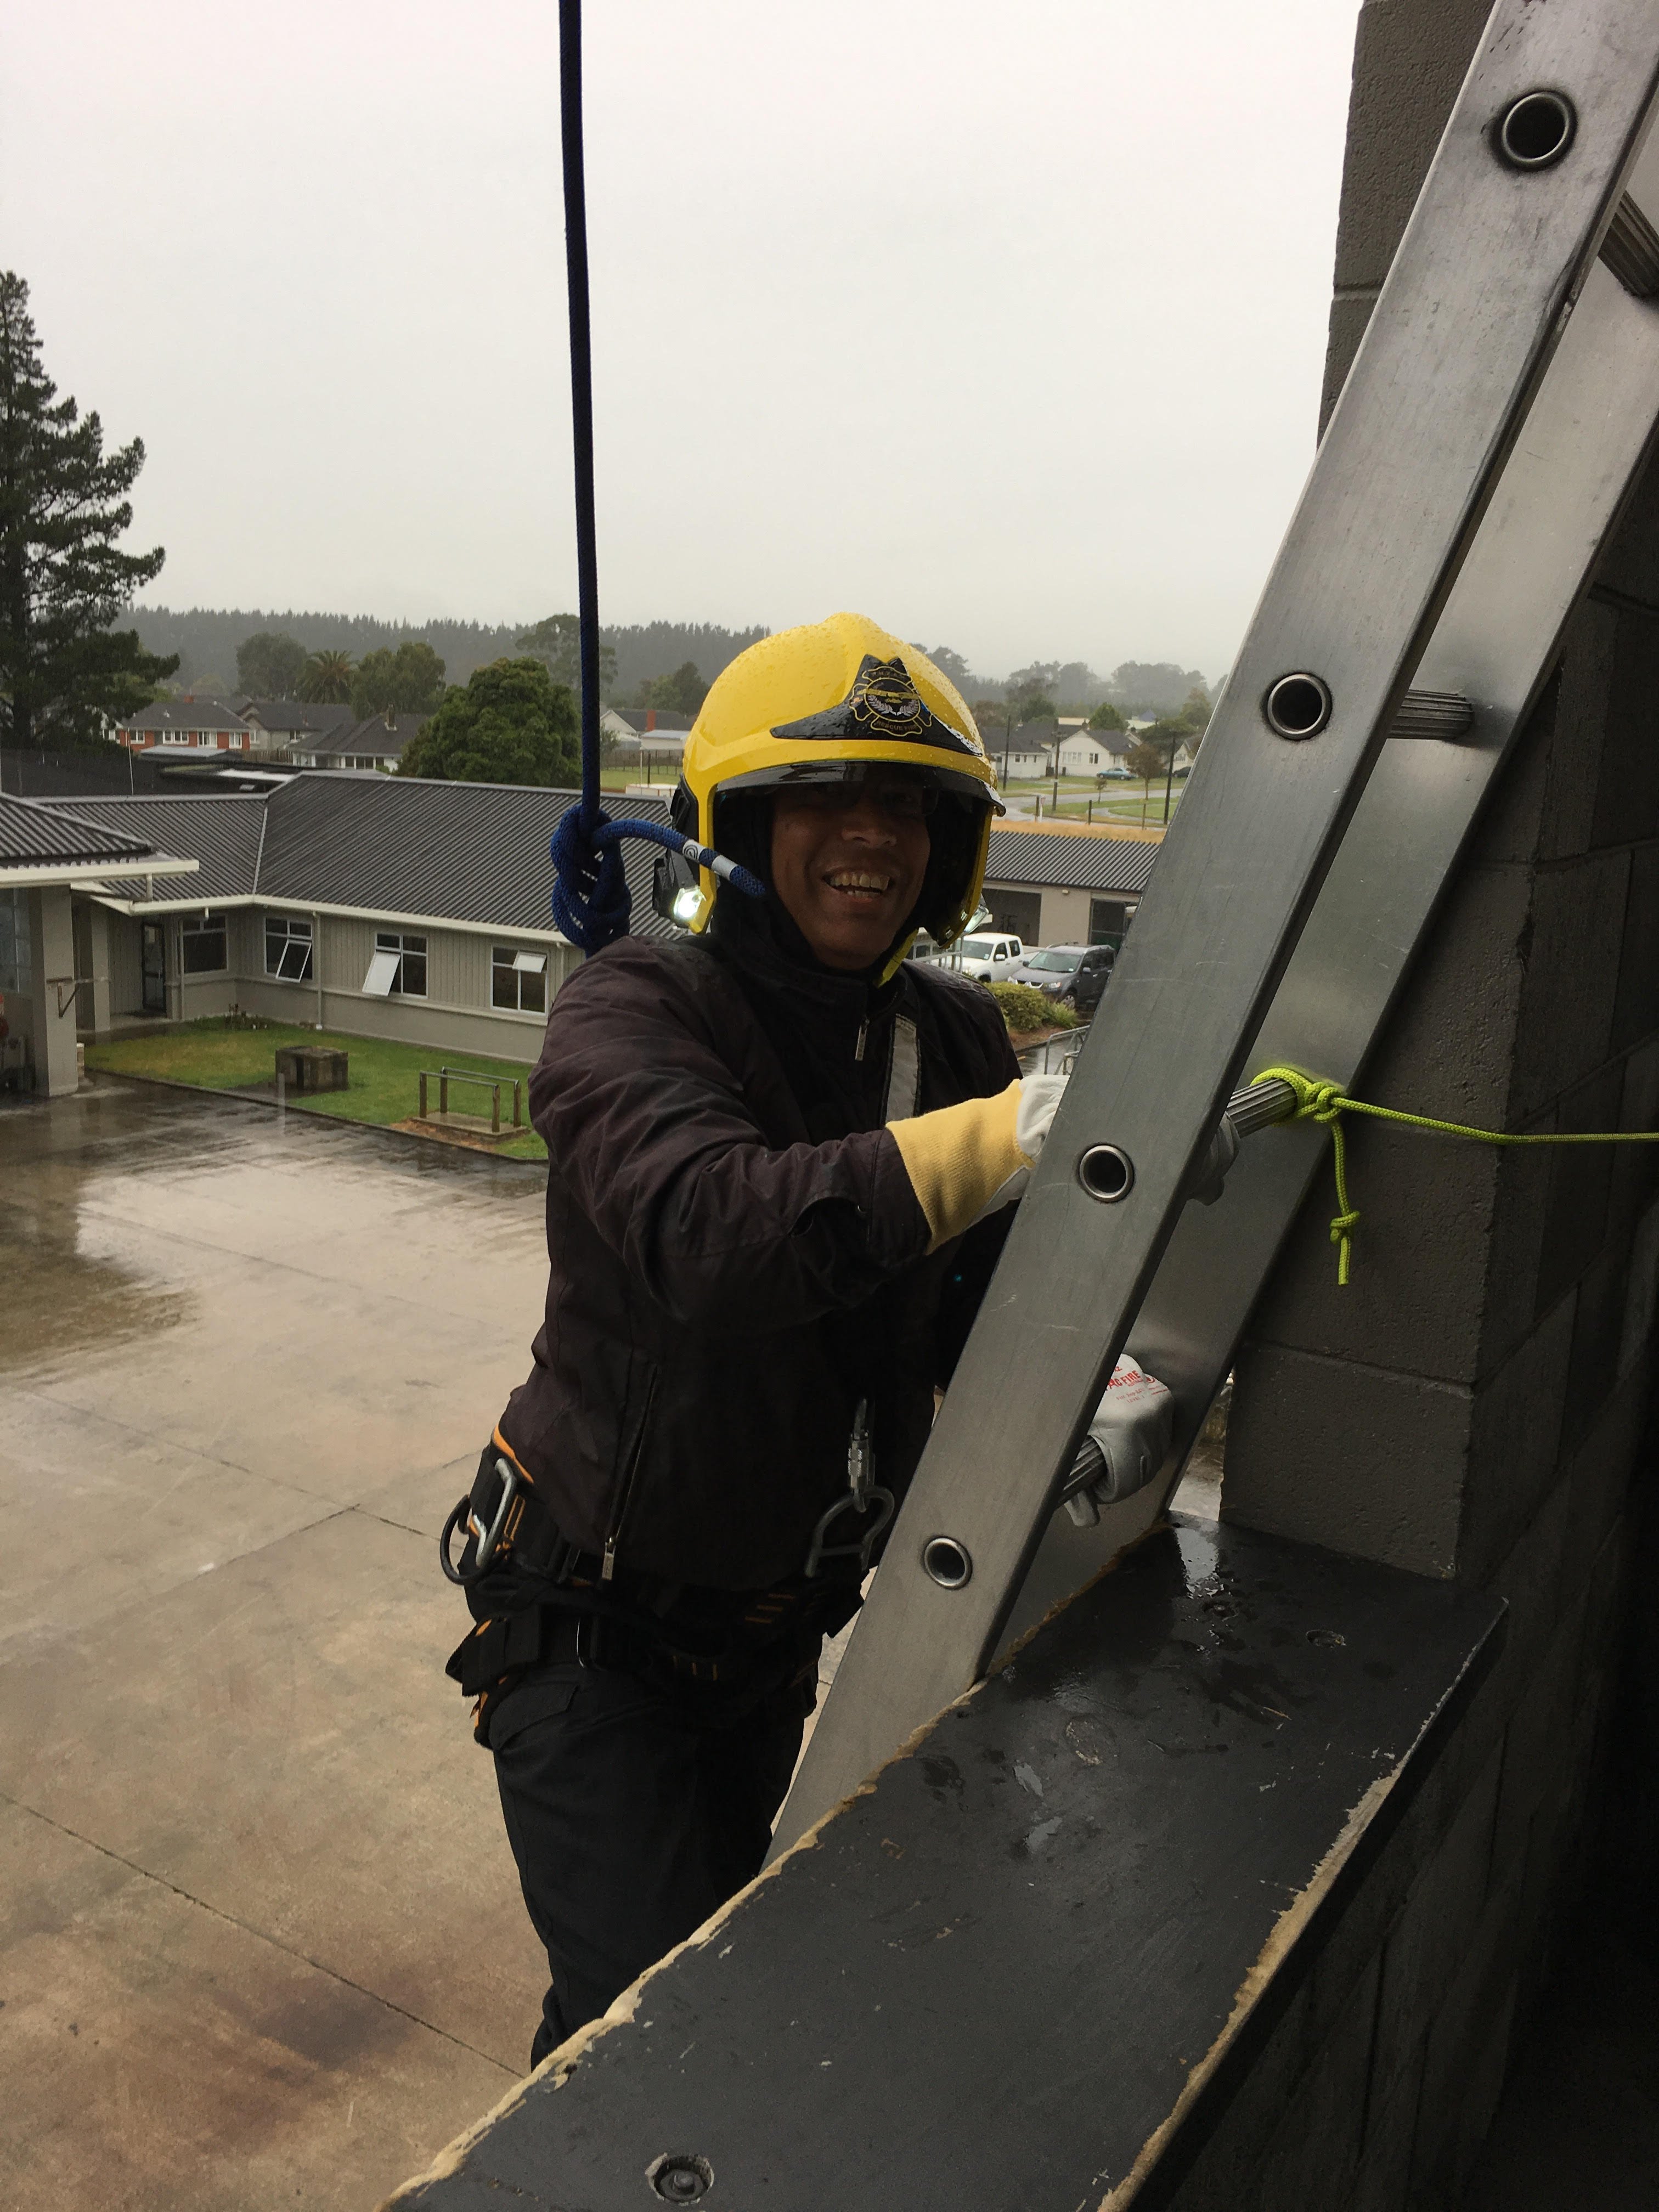 Deepa working at safety at heights